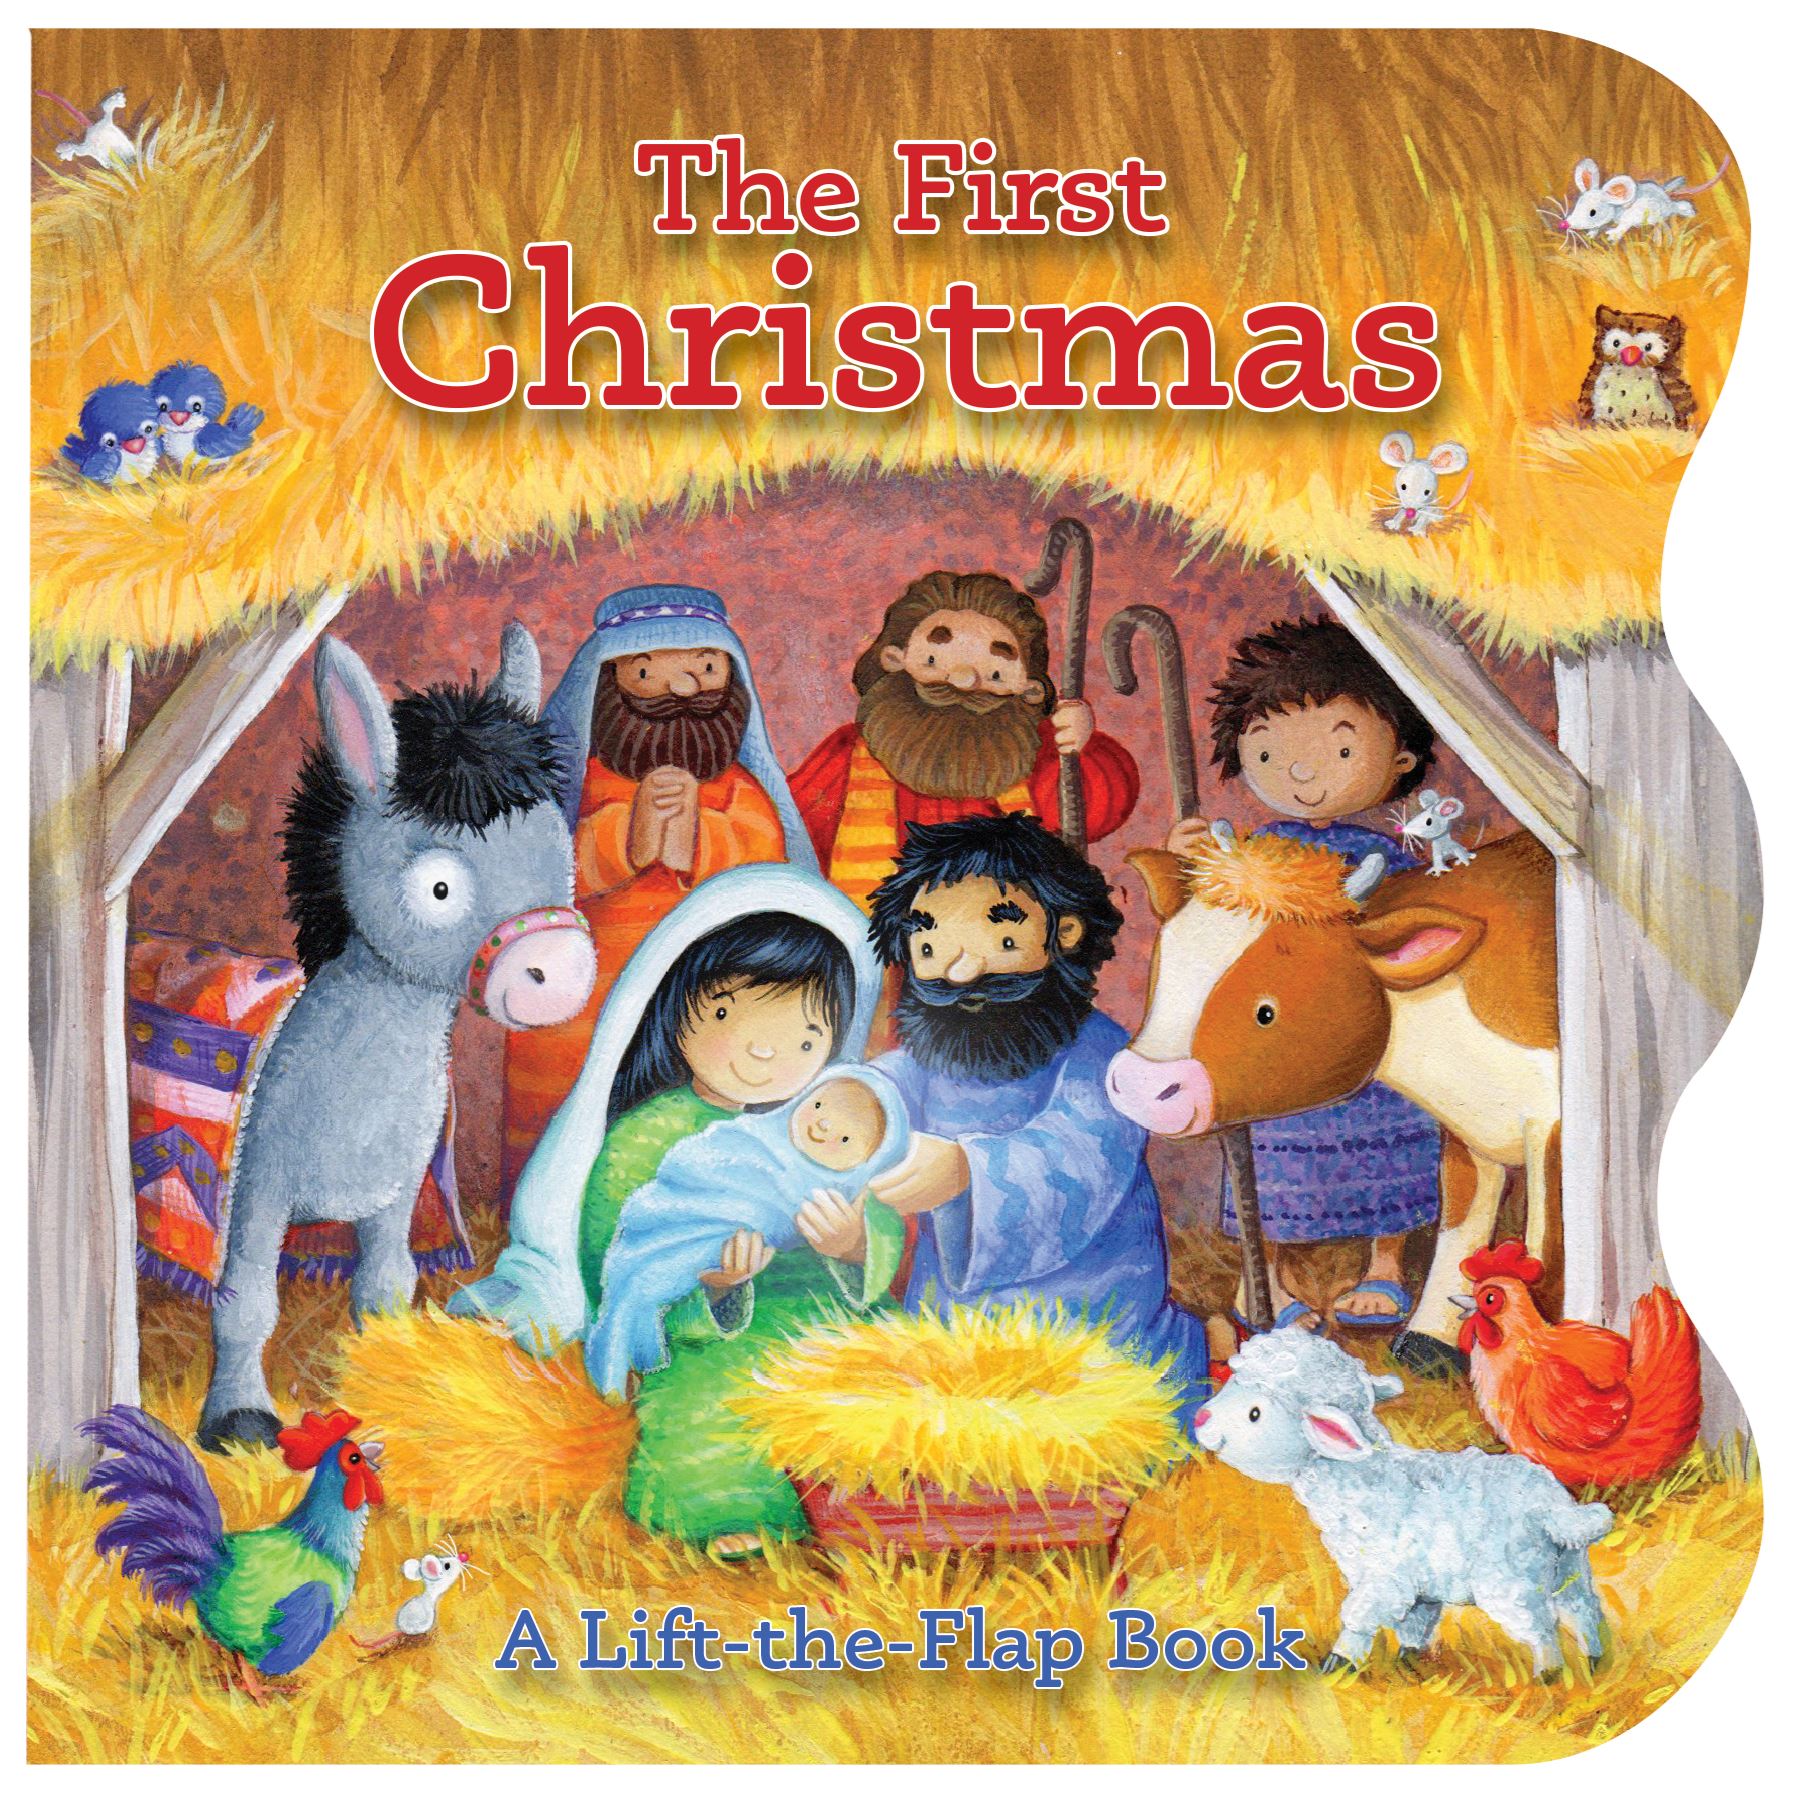 The First Christmas: A Lift-a-Flap Book